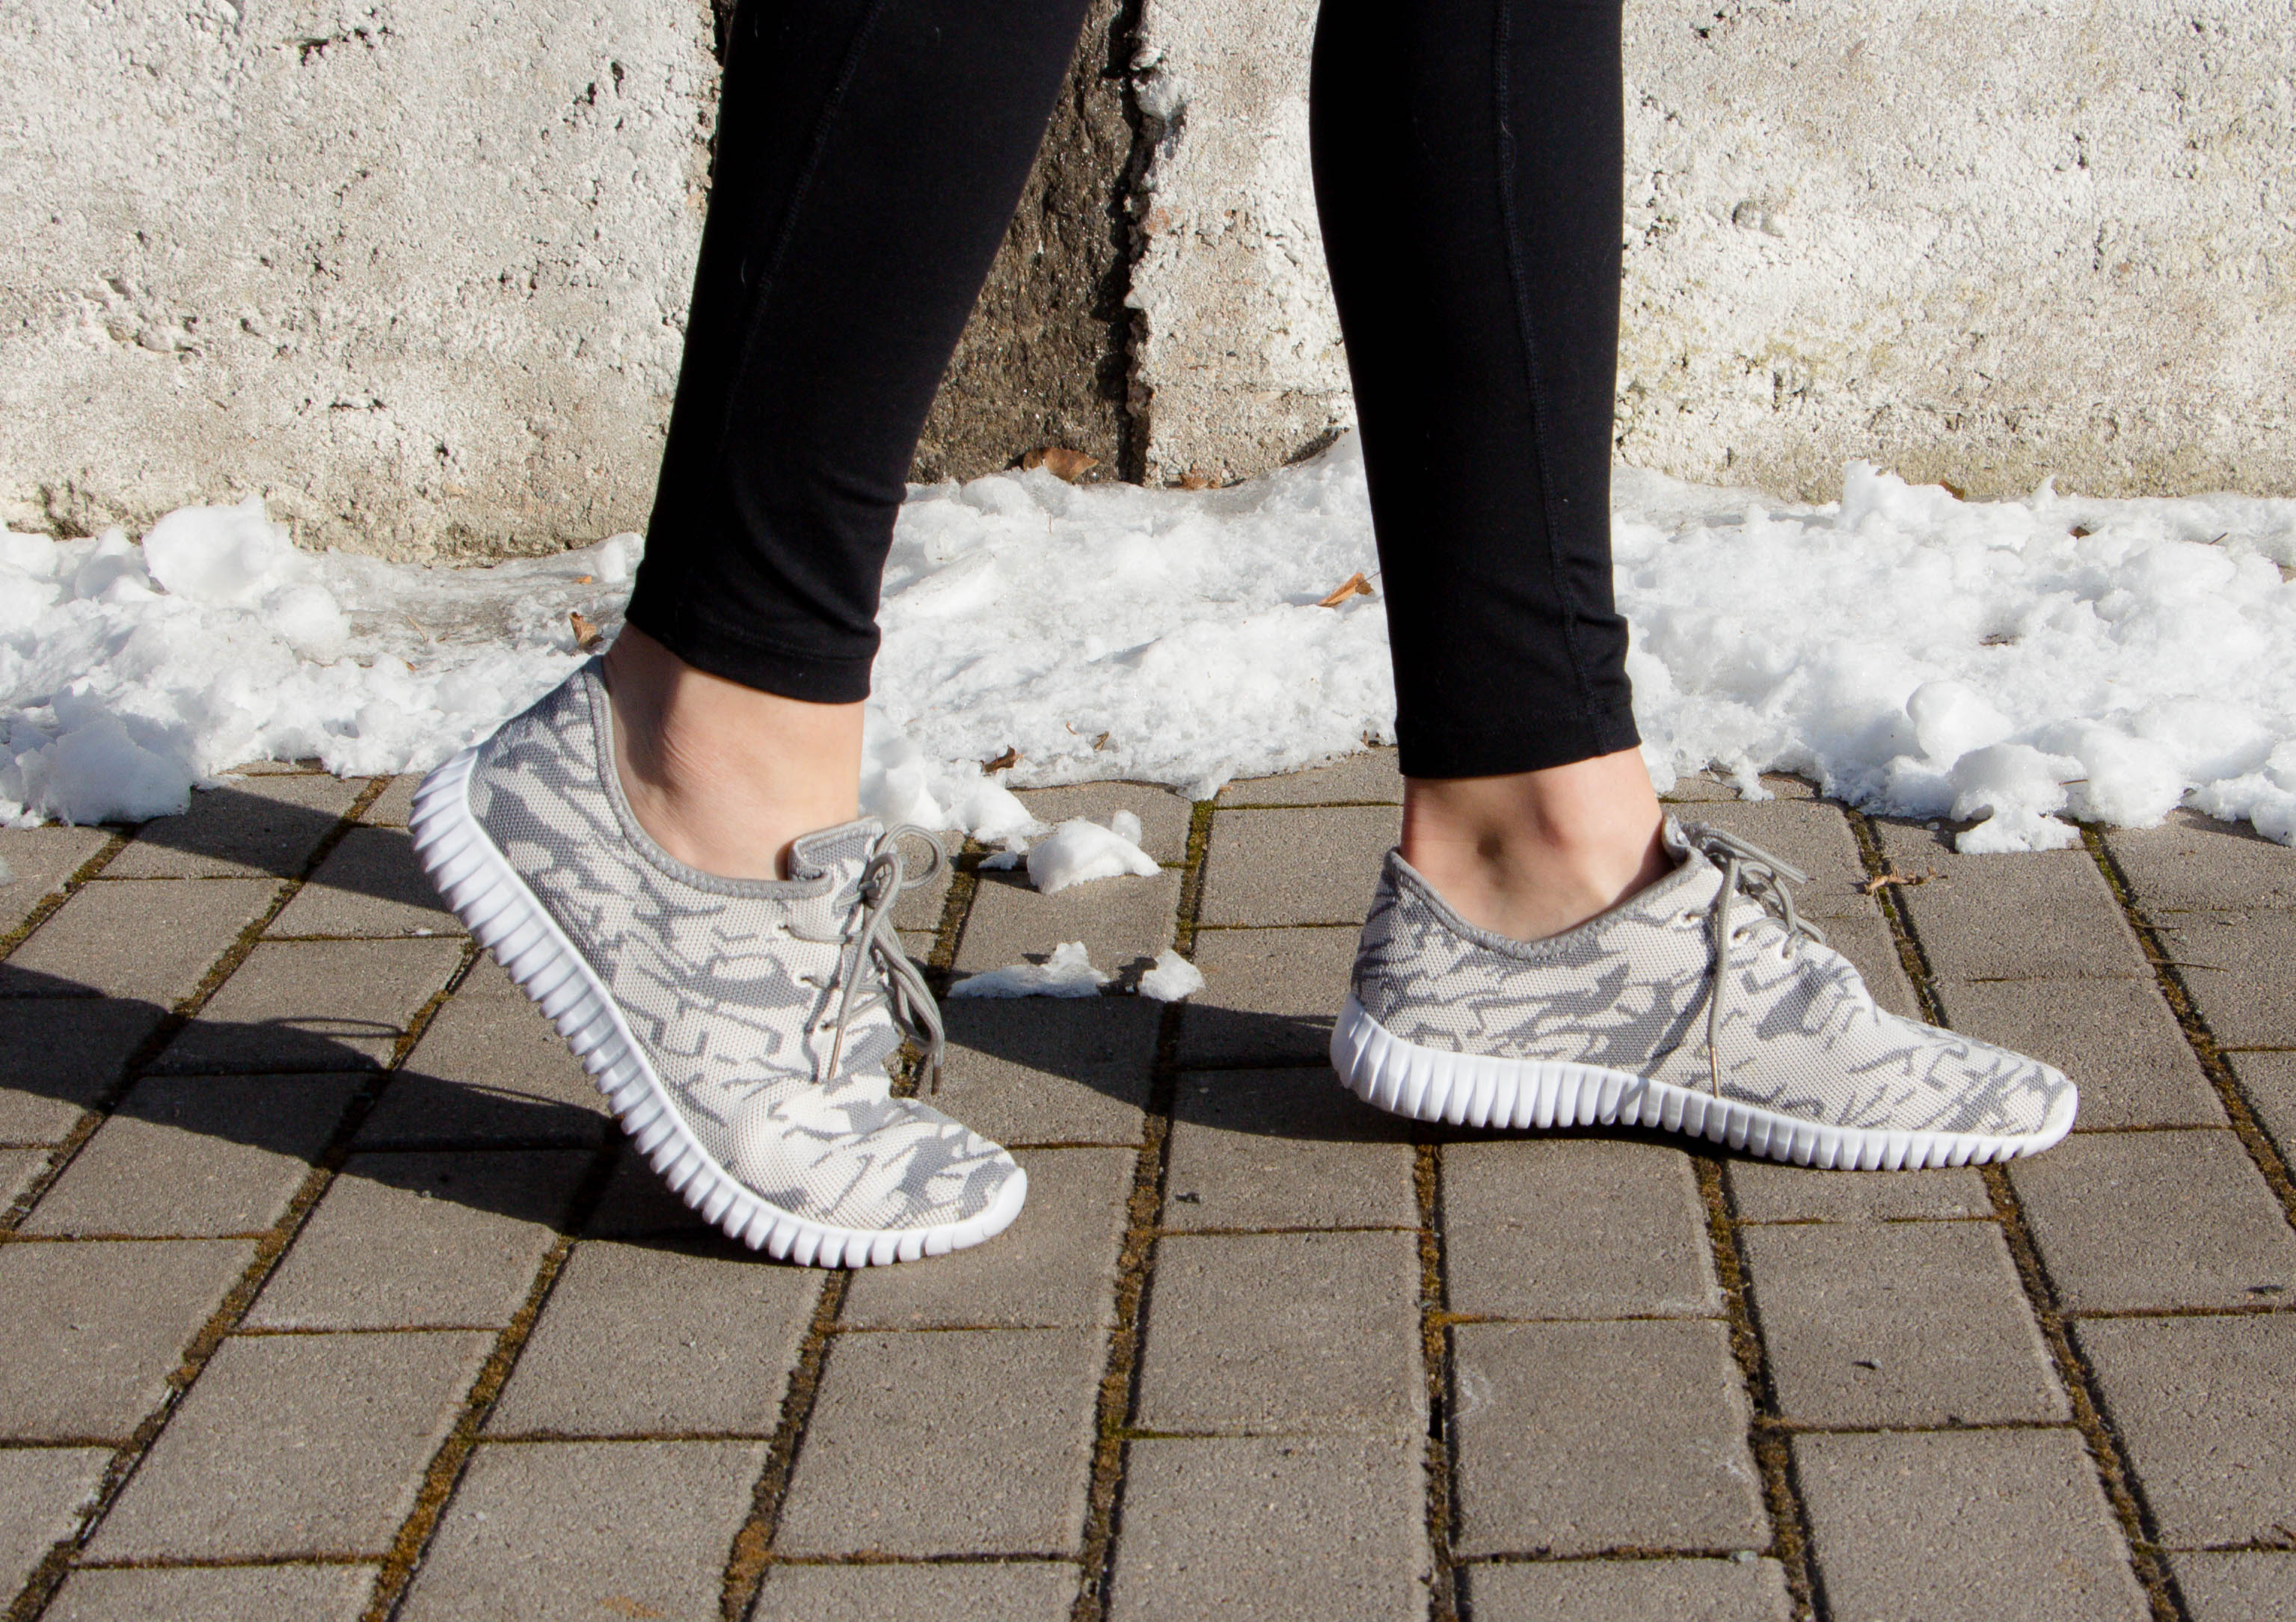 Sneakers, perfect for the outdoor excursions.